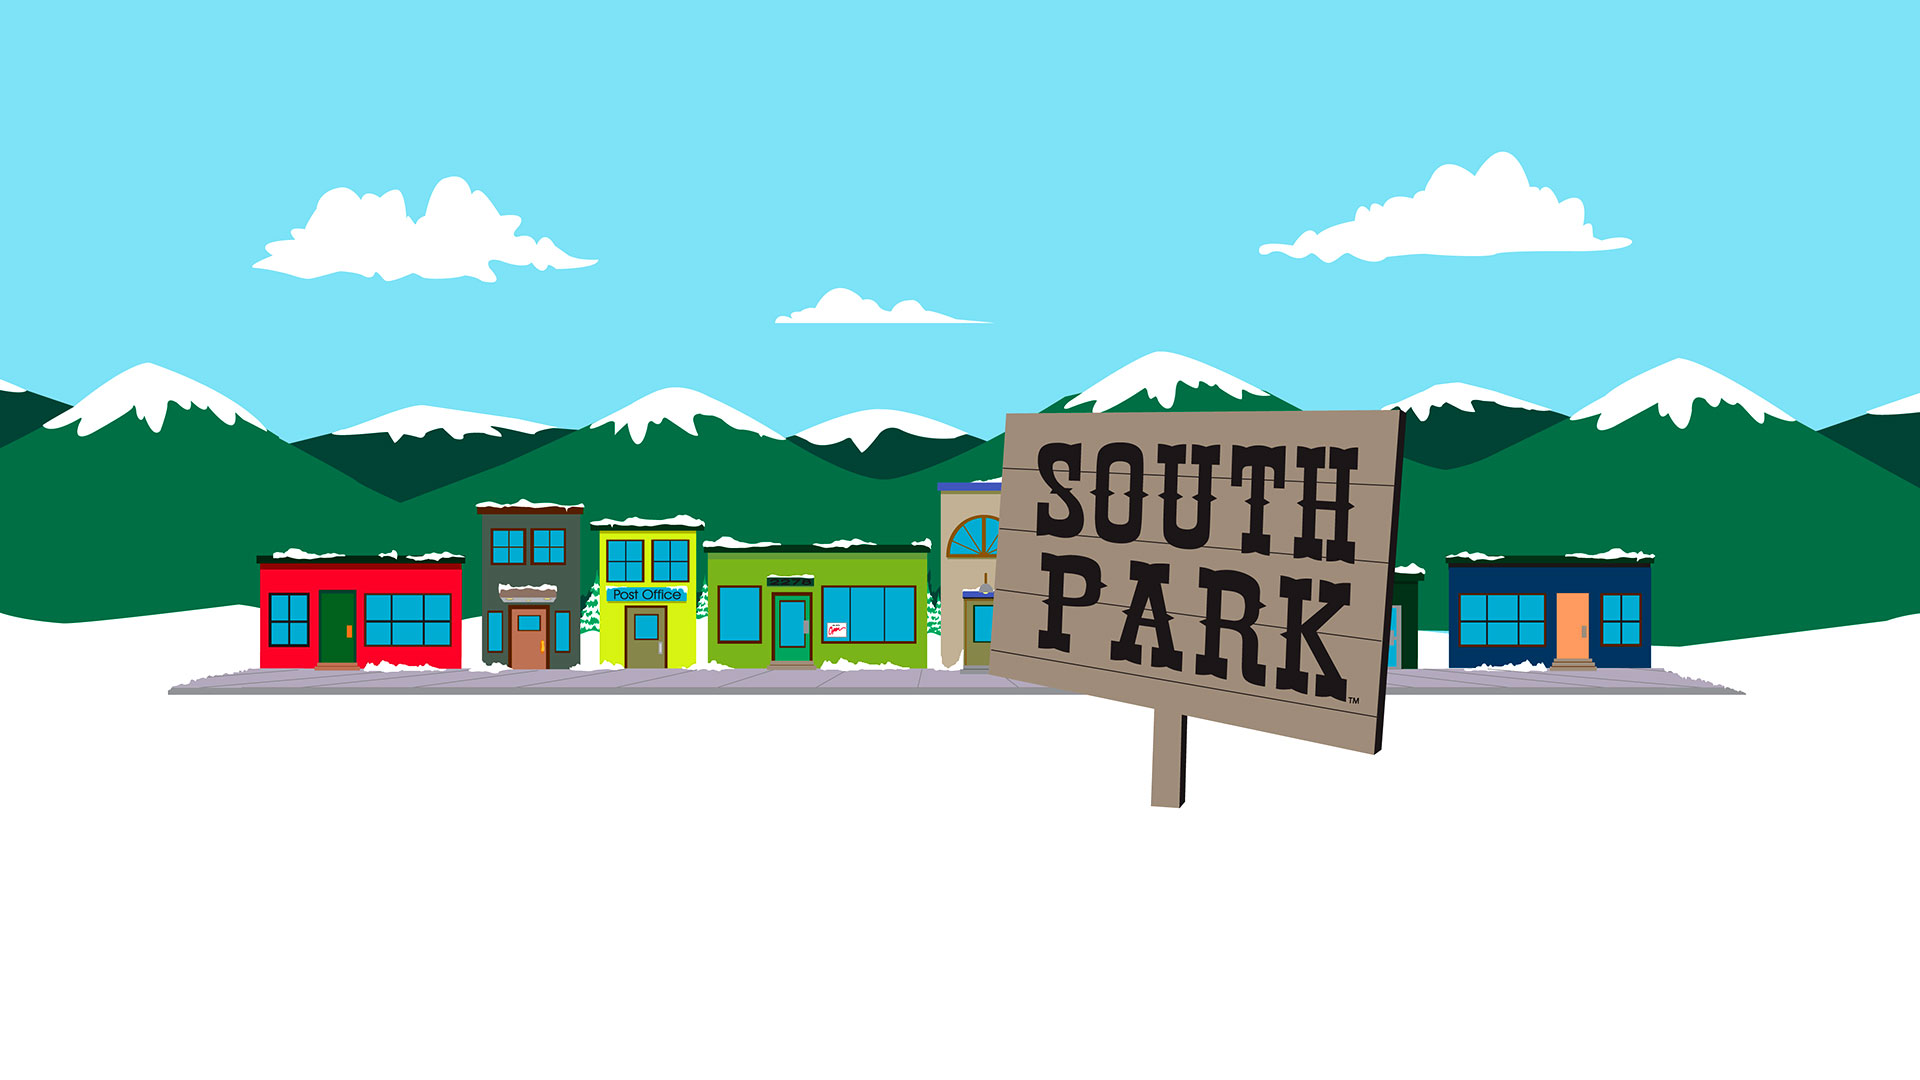 Game hight resolution background South Park